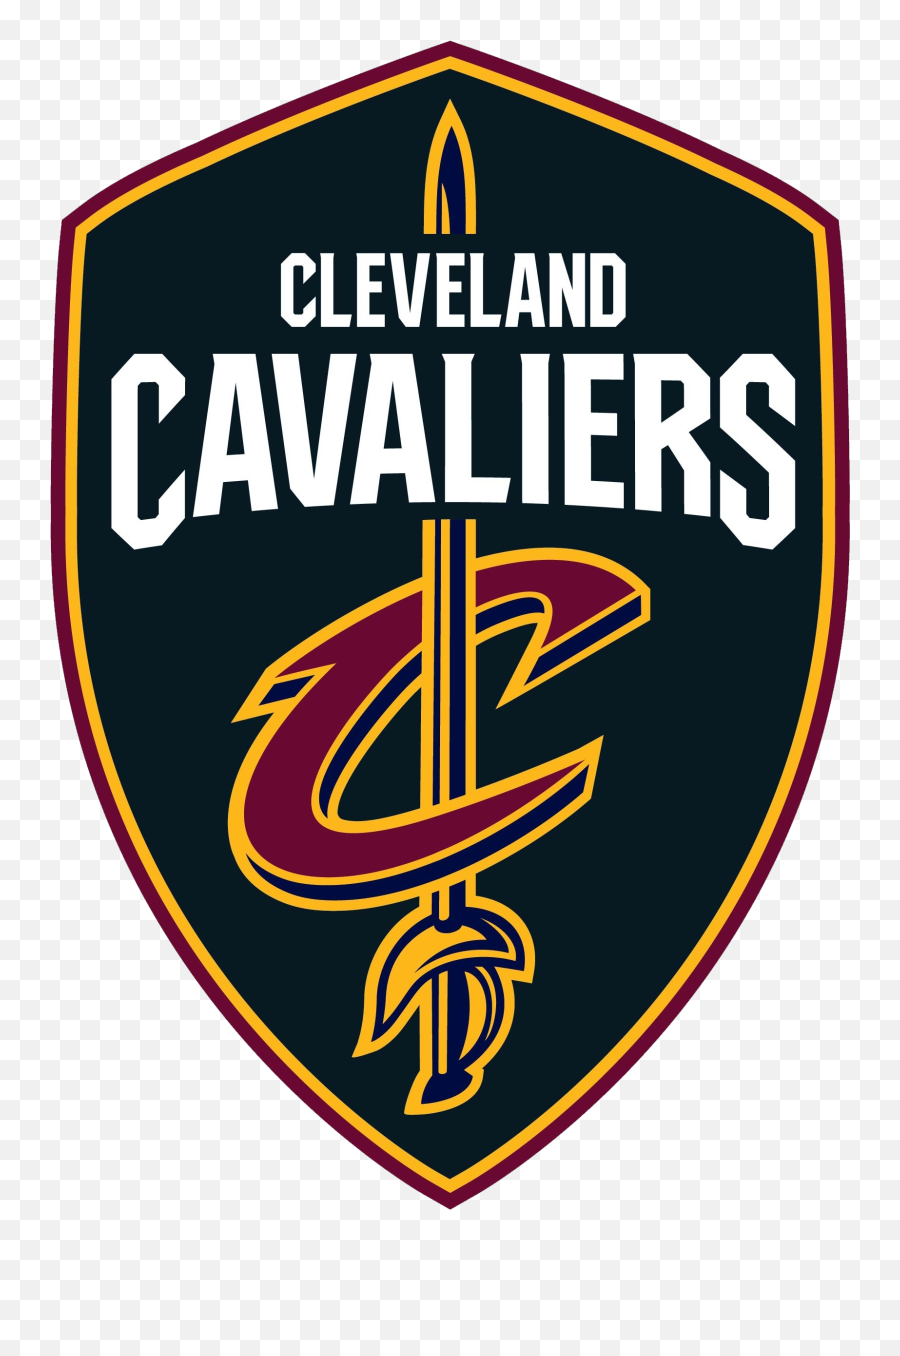 The Cleveland Cavaliers - Cleveland Cavaliers Logo Emoji,Cleveland Cavaliers Logo